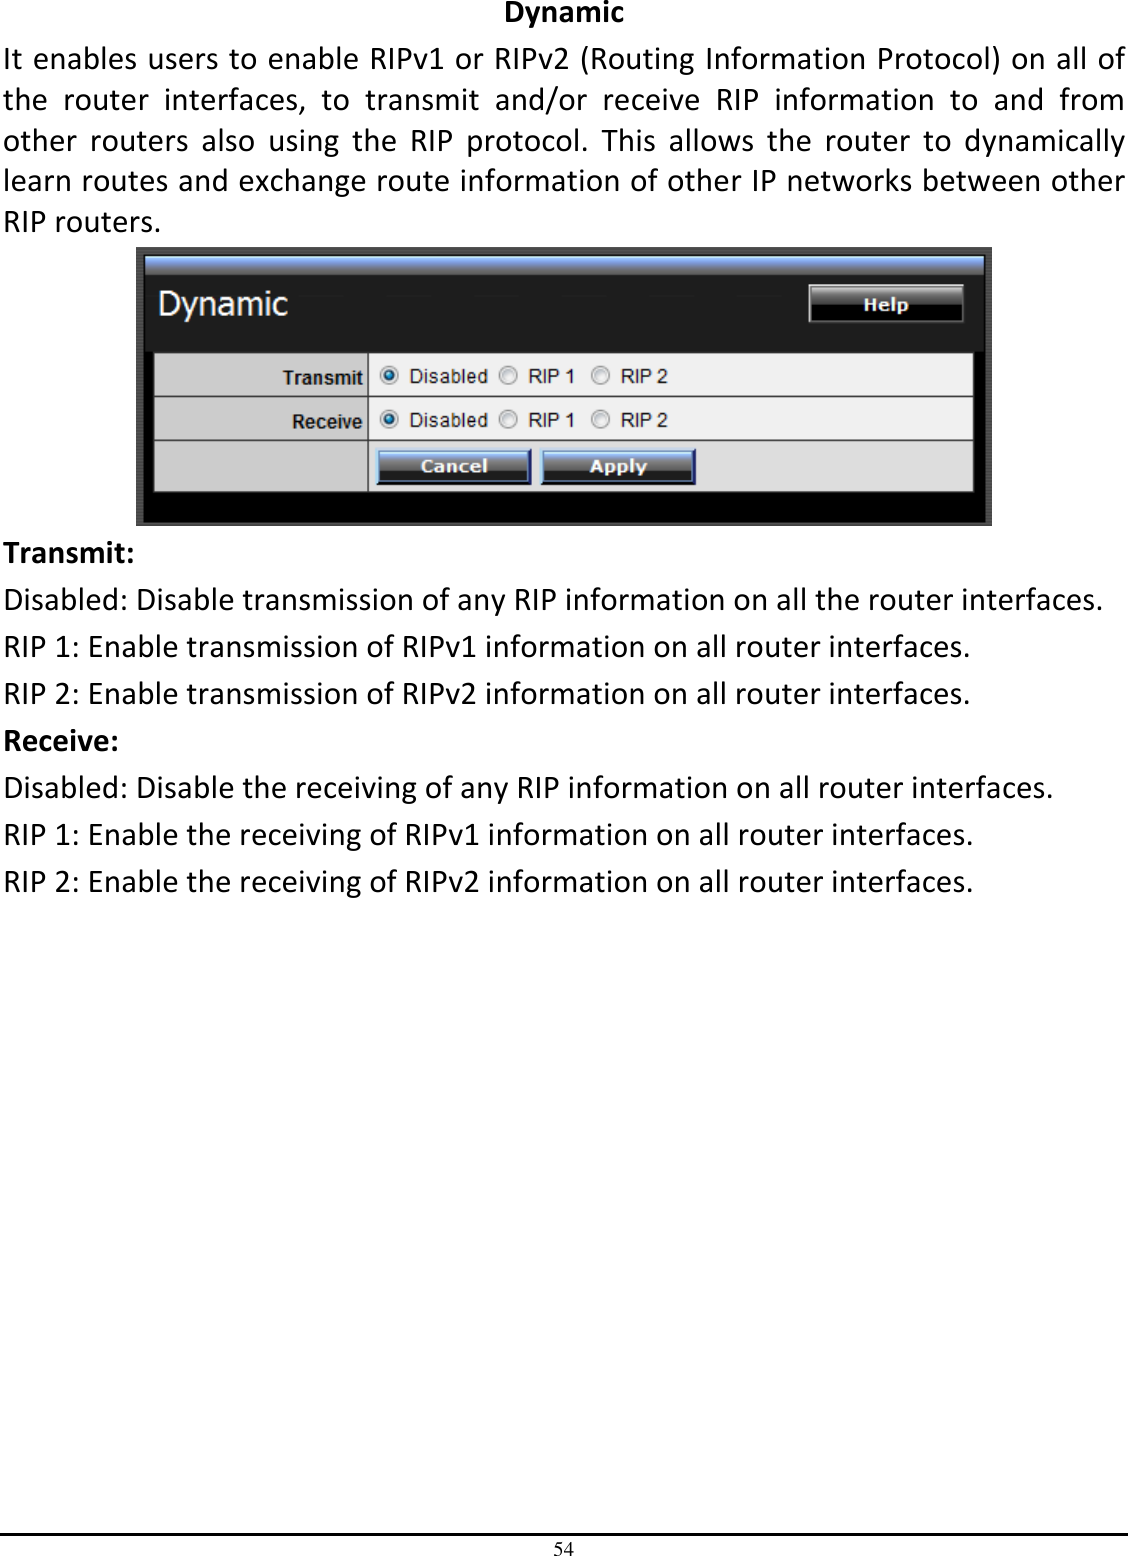 54 Dynamic It enables users to enable RIPv1 or RIPv2 (Routing Information Protocol) on all of the  router  interfaces,  to  transmit  and/or  receive  RIP  information  to  and  from other  routers  also  using  the  RIP  protocol.  This  allows  the  router  to  dynamically learn routes and exchange route information of other IP networks between other RIP routers.  Transmit: Disabled: Disable transmission of any RIP information on all the router interfaces.  RIP 1: Enable transmission of RIPv1 information on all router interfaces. RIP 2: Enable transmission of RIPv2 information on all router interfaces. Receive:  Disabled: Disable the receiving of any RIP information on all router interfaces. RIP 1: Enable the receiving of RIPv1 information on all router interfaces. RIP 2: Enable the receiving of RIPv2 information on all router interfaces.  